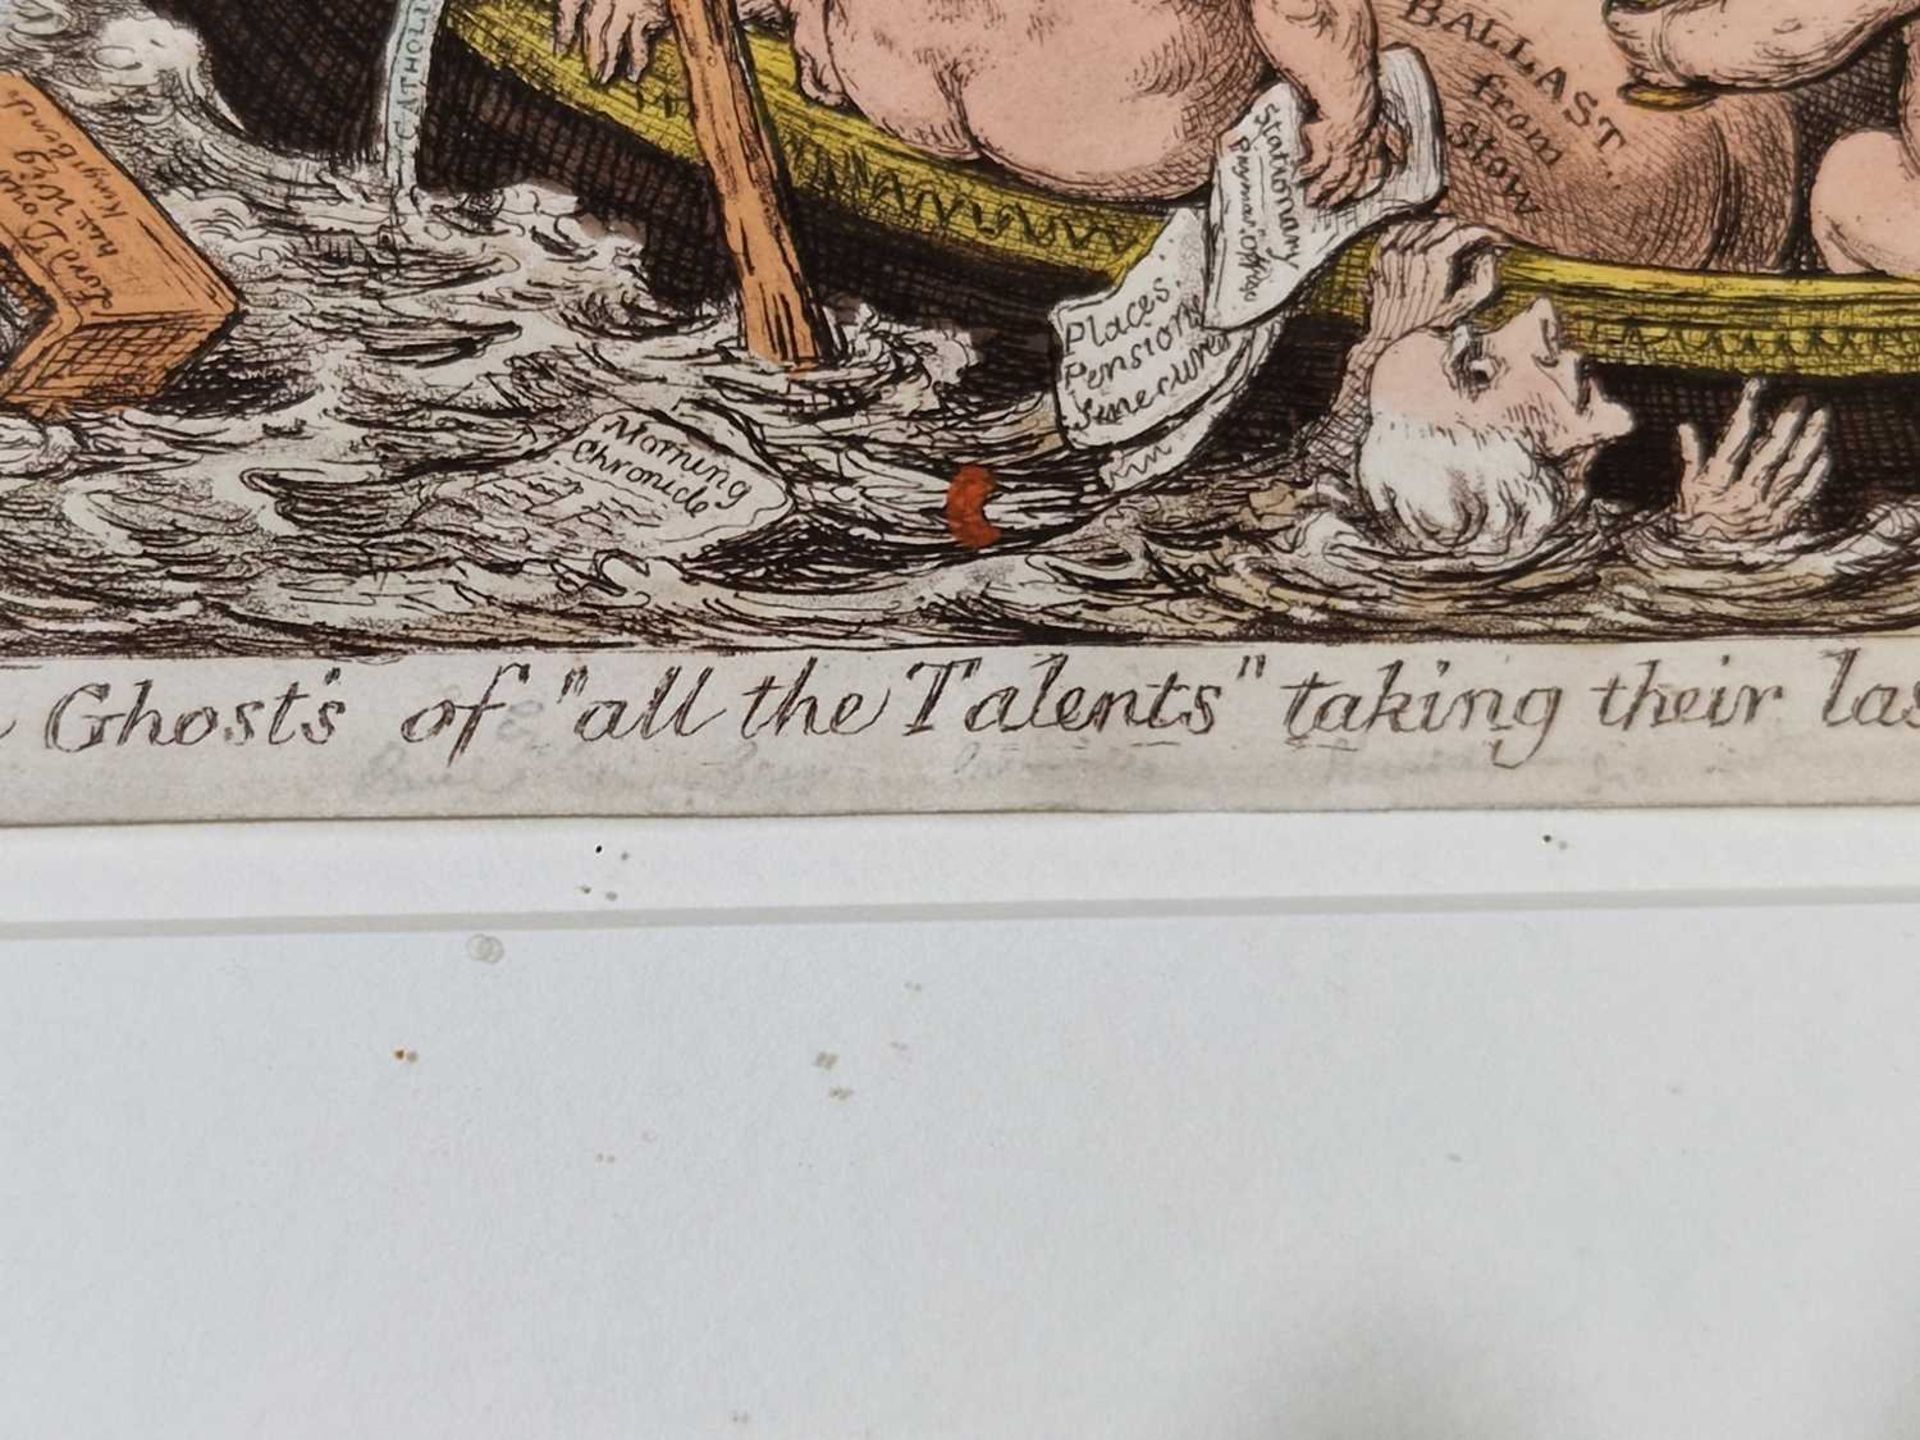 After James Gillray (1756-1815), 'Charon's Boat or the Ghosts of "all the Talents" taking their last - Image 15 of 16